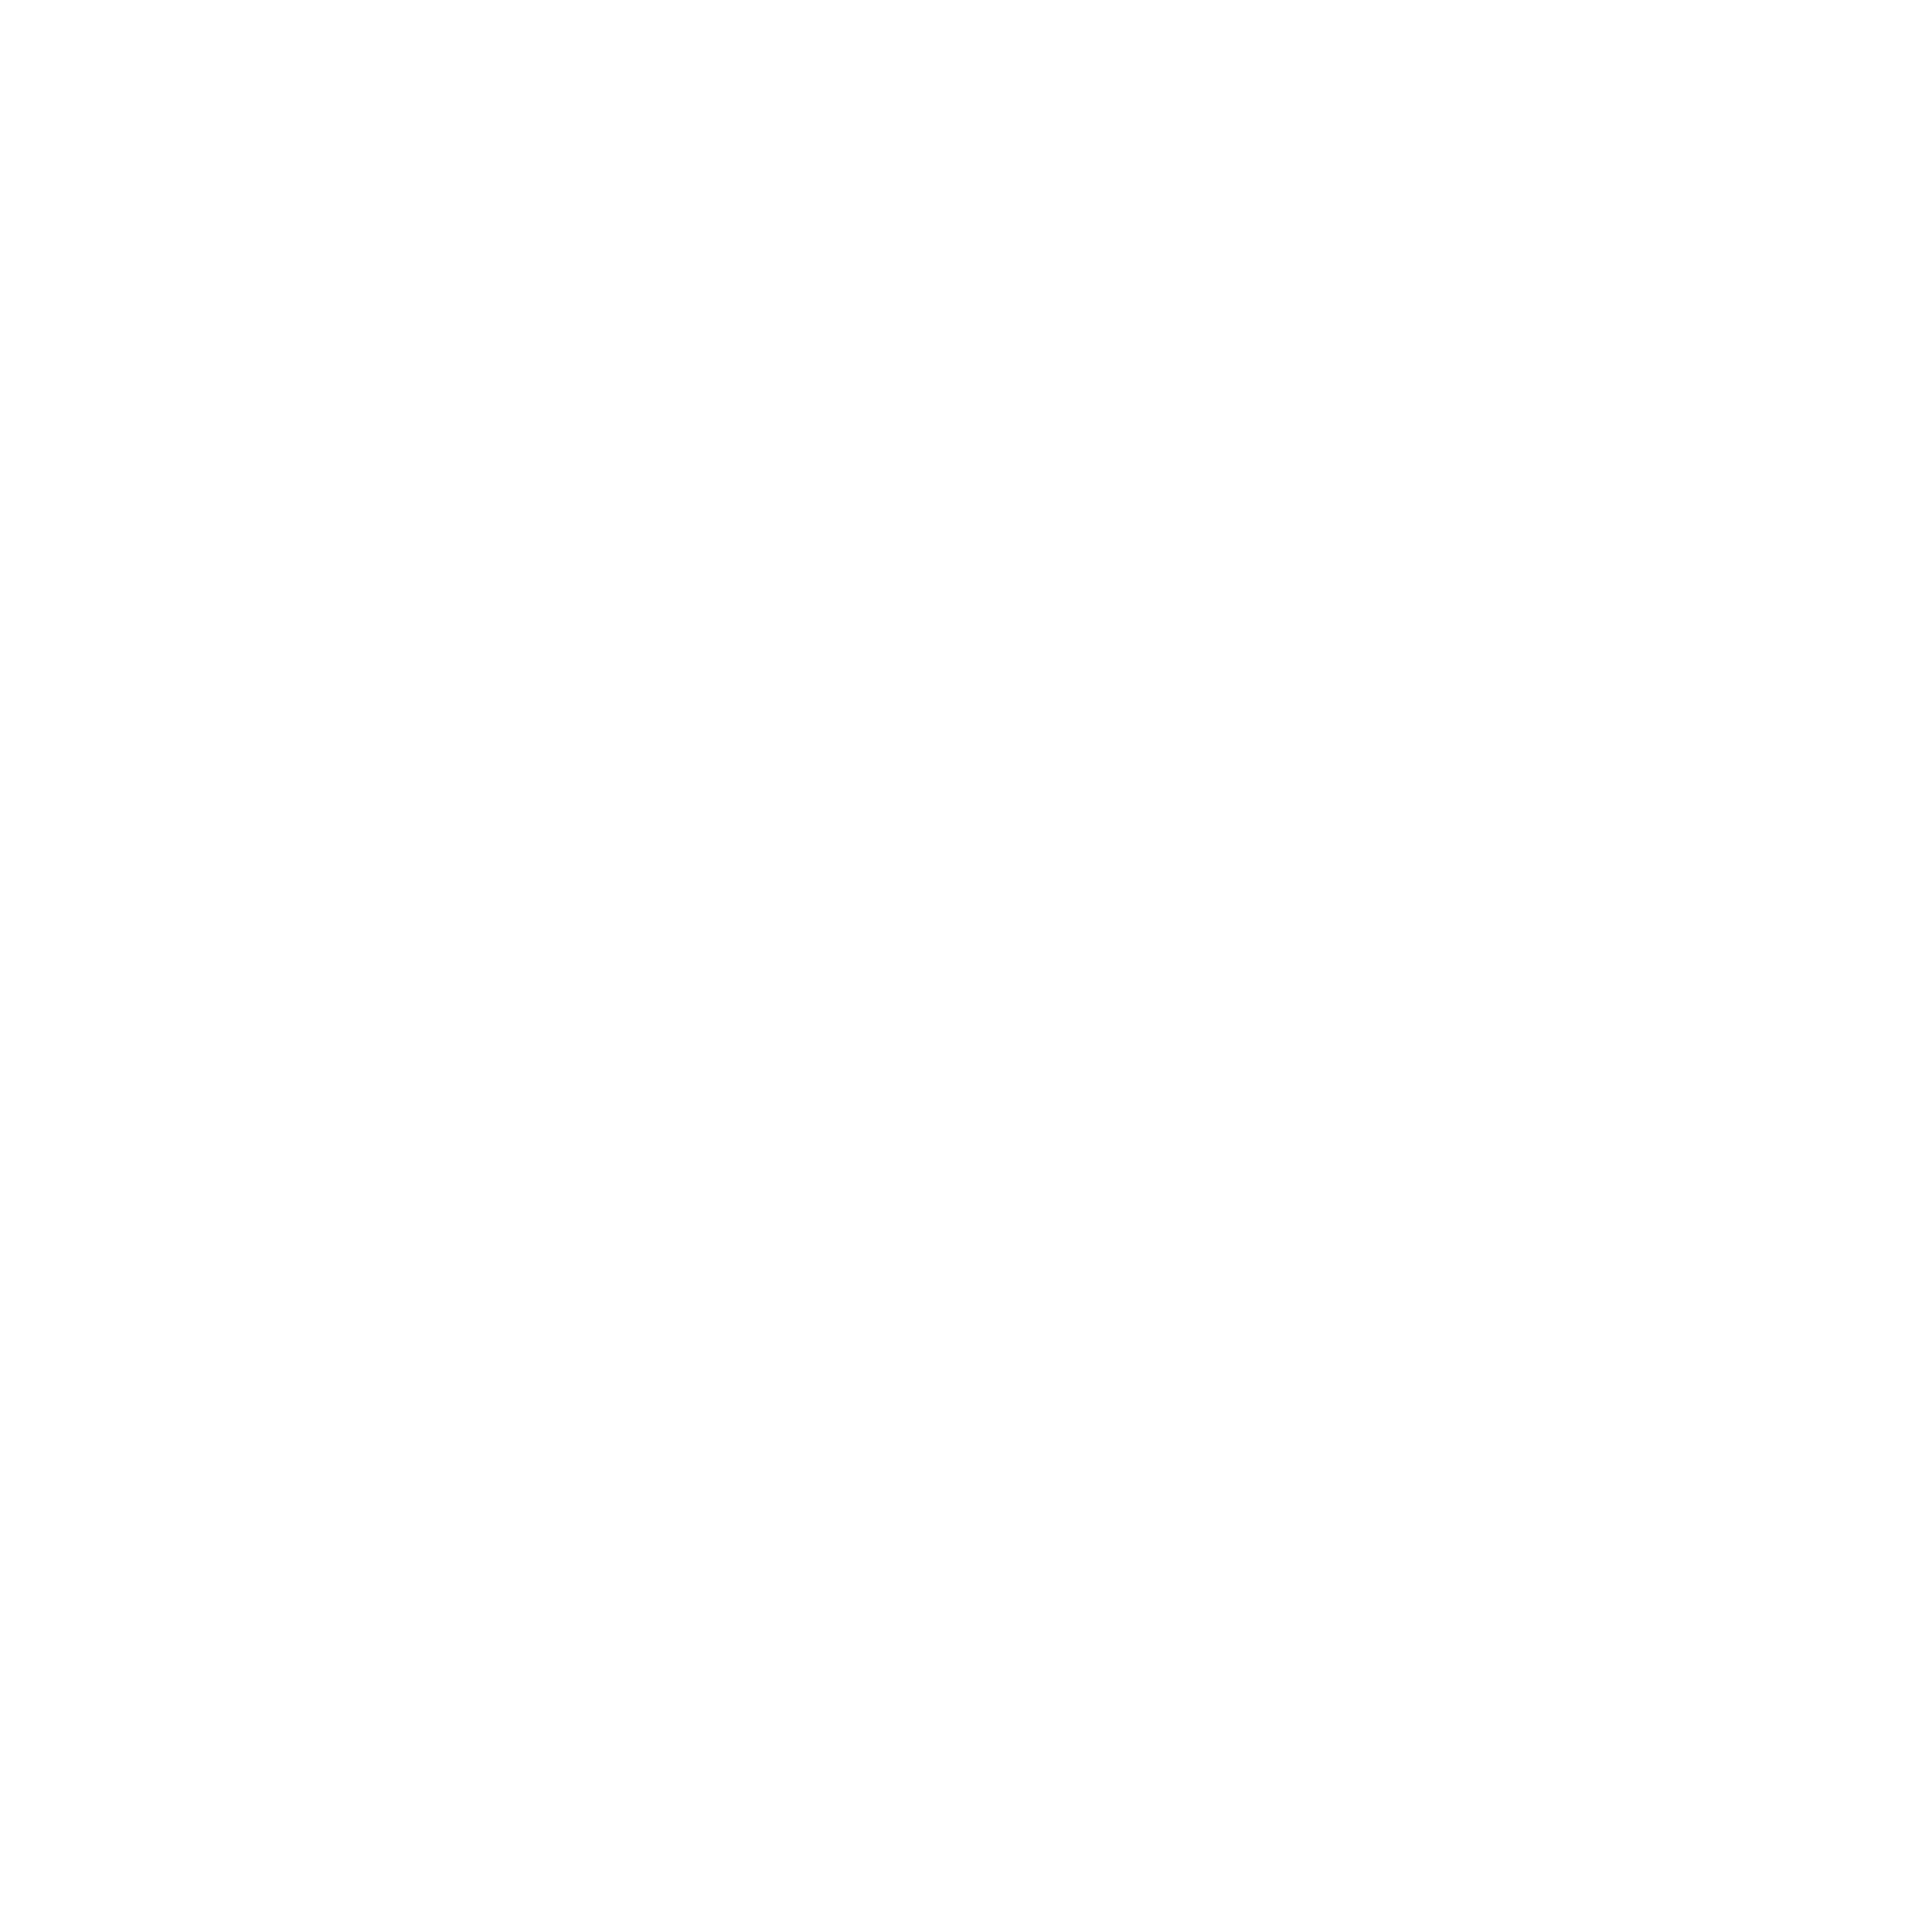 The Mess Tent • 2020